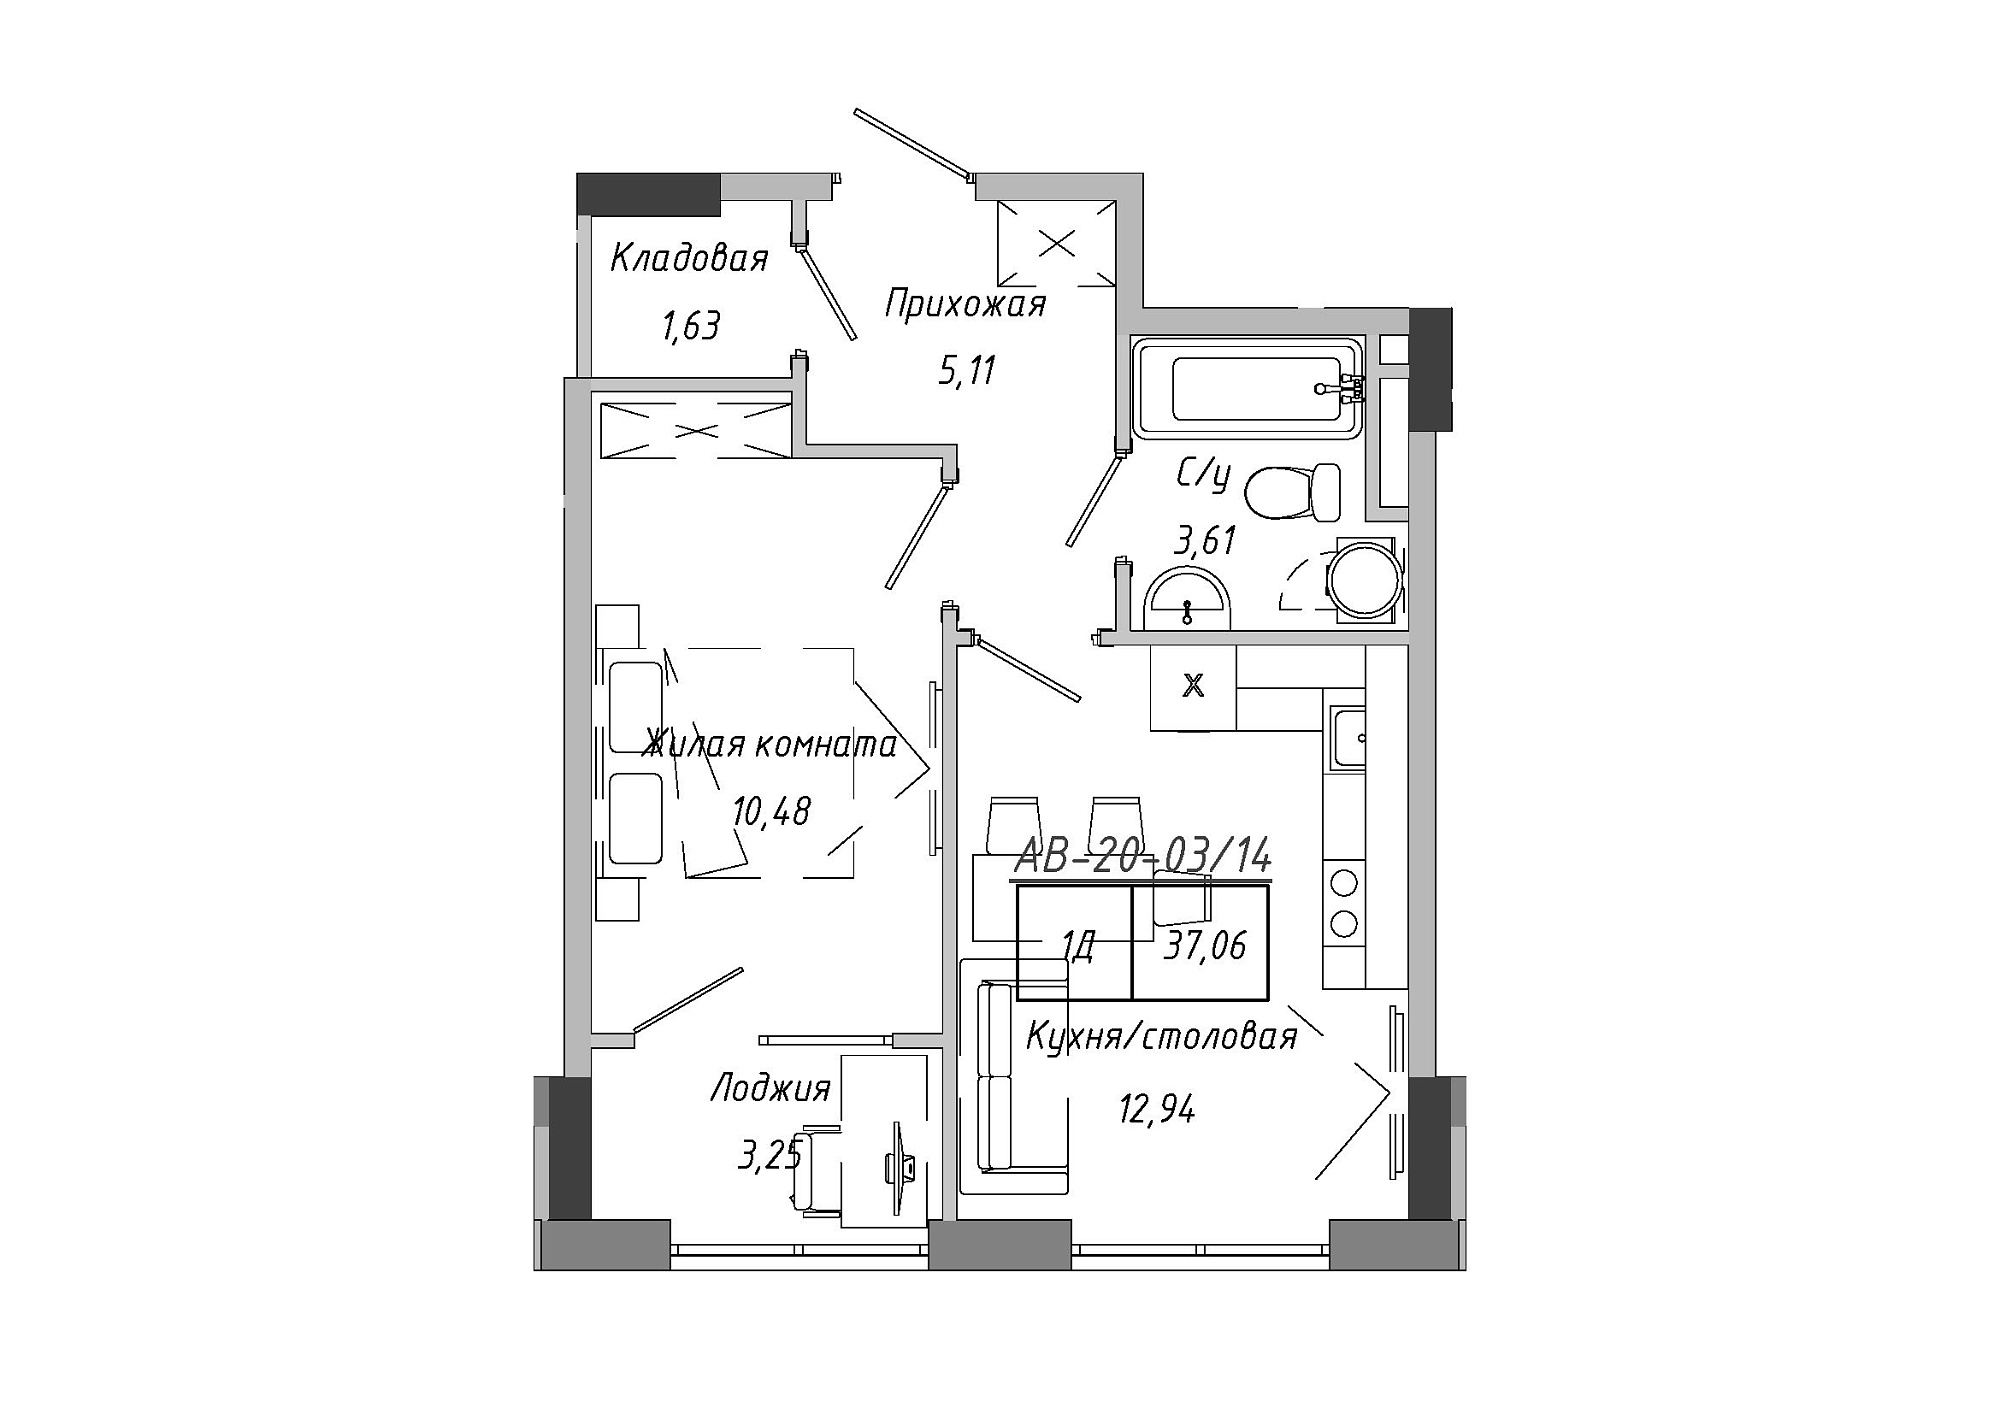 Planning 1-rm flats area 37.06m2, AB-20-03/00014.